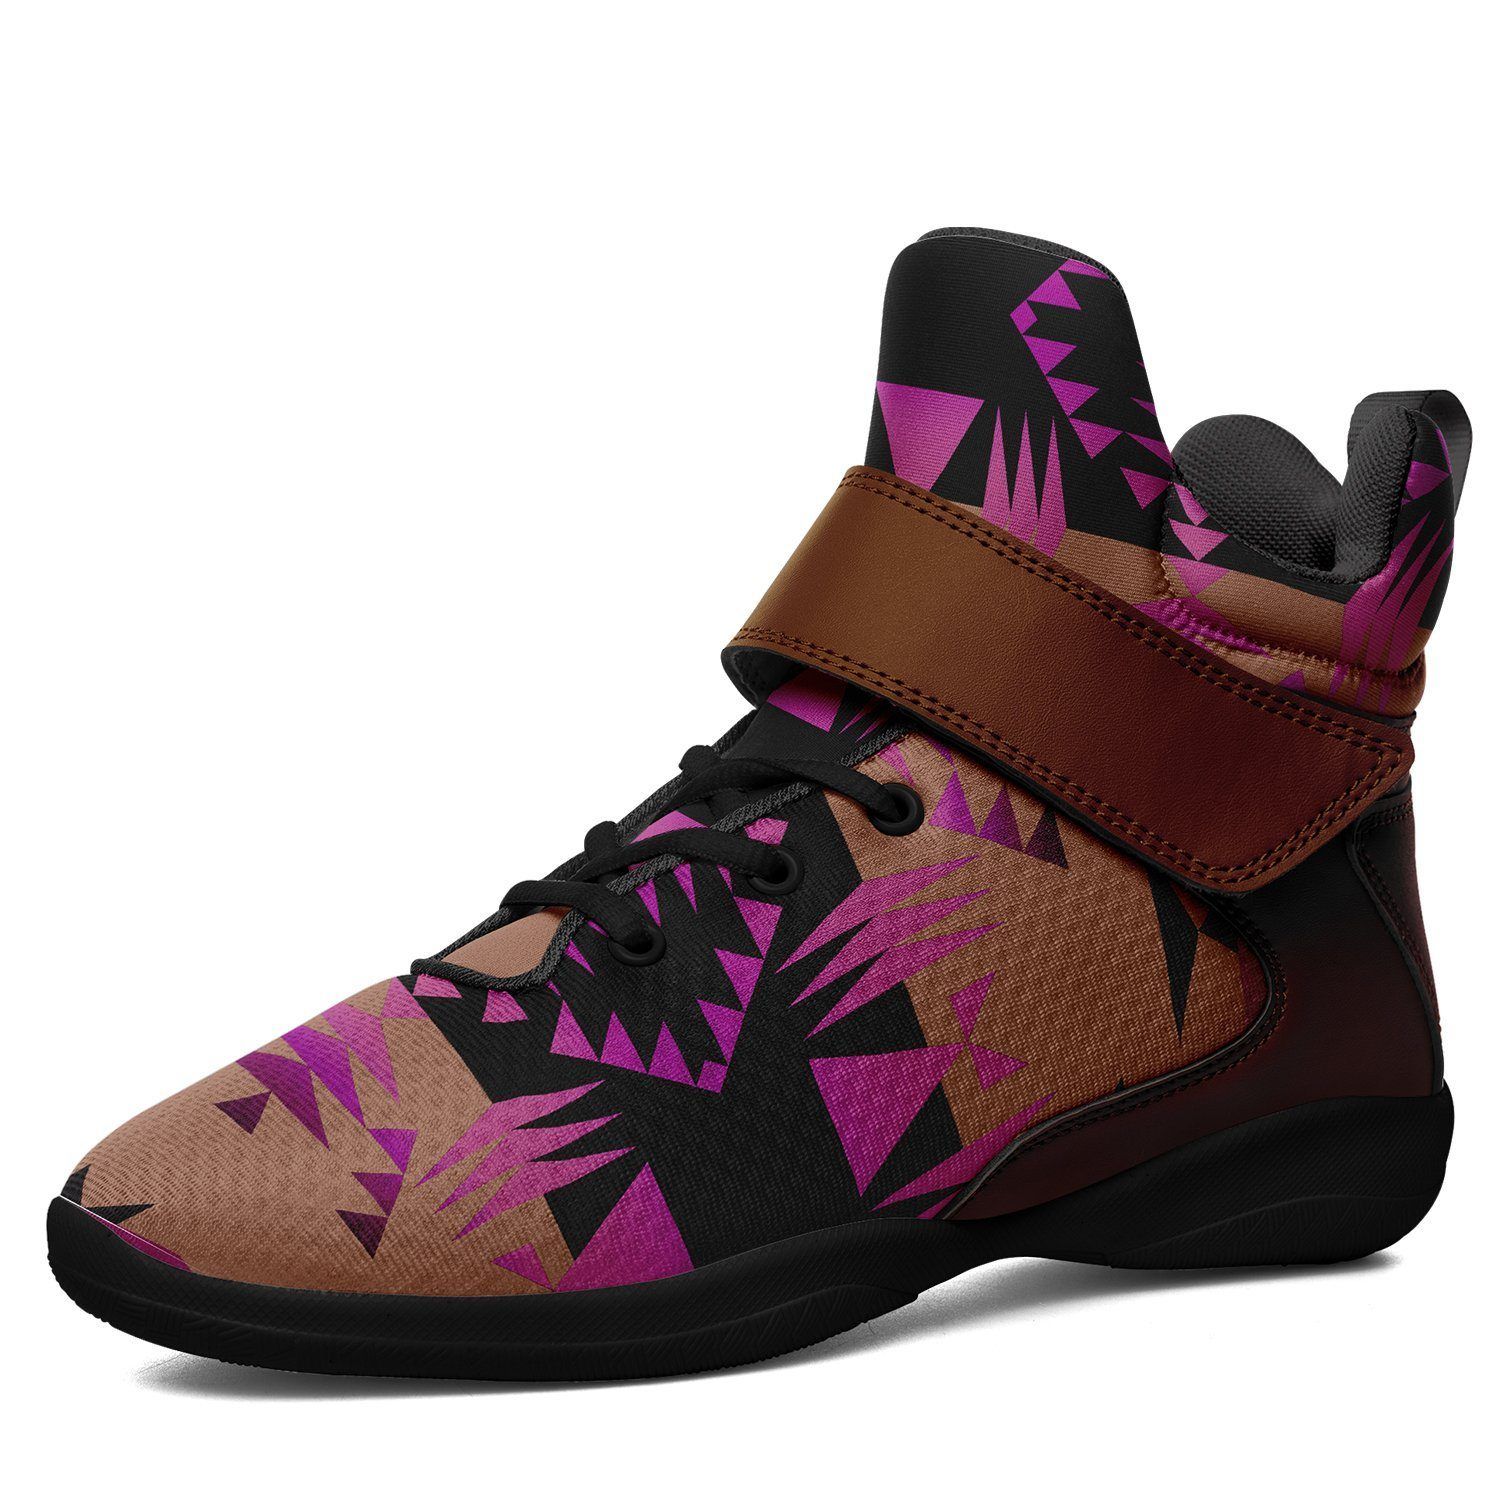 Between the Mountains Berry Ipottaa Basketball / Sport High Top Shoes - Black Sole 49 Dzine US Men 7 / EUR 40 Black Sole with Brown Strap 